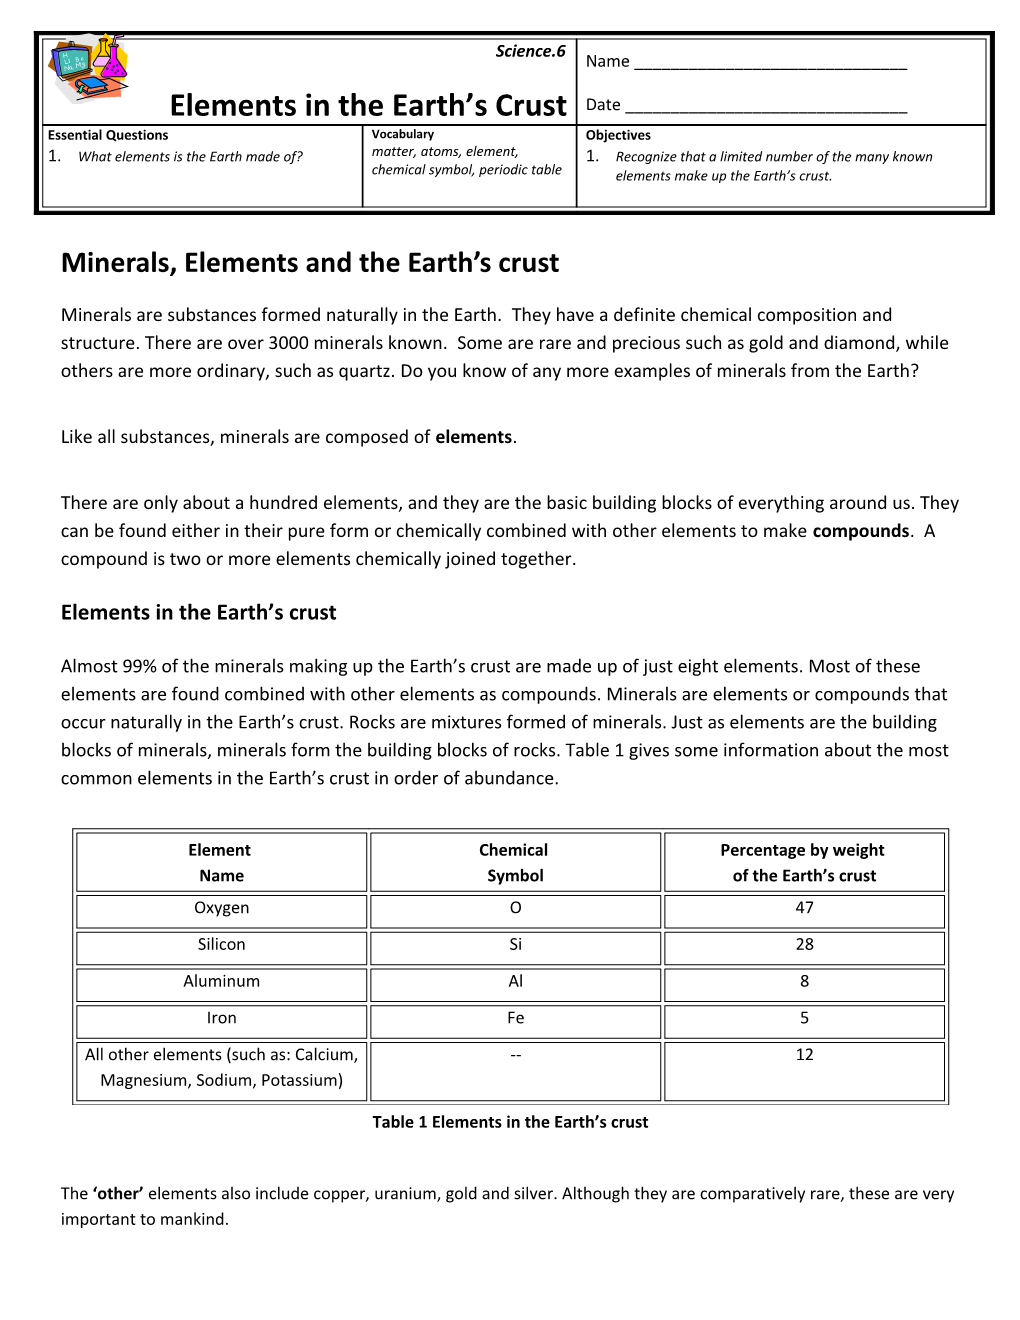 Minerals, Elements and the Earth S Crust